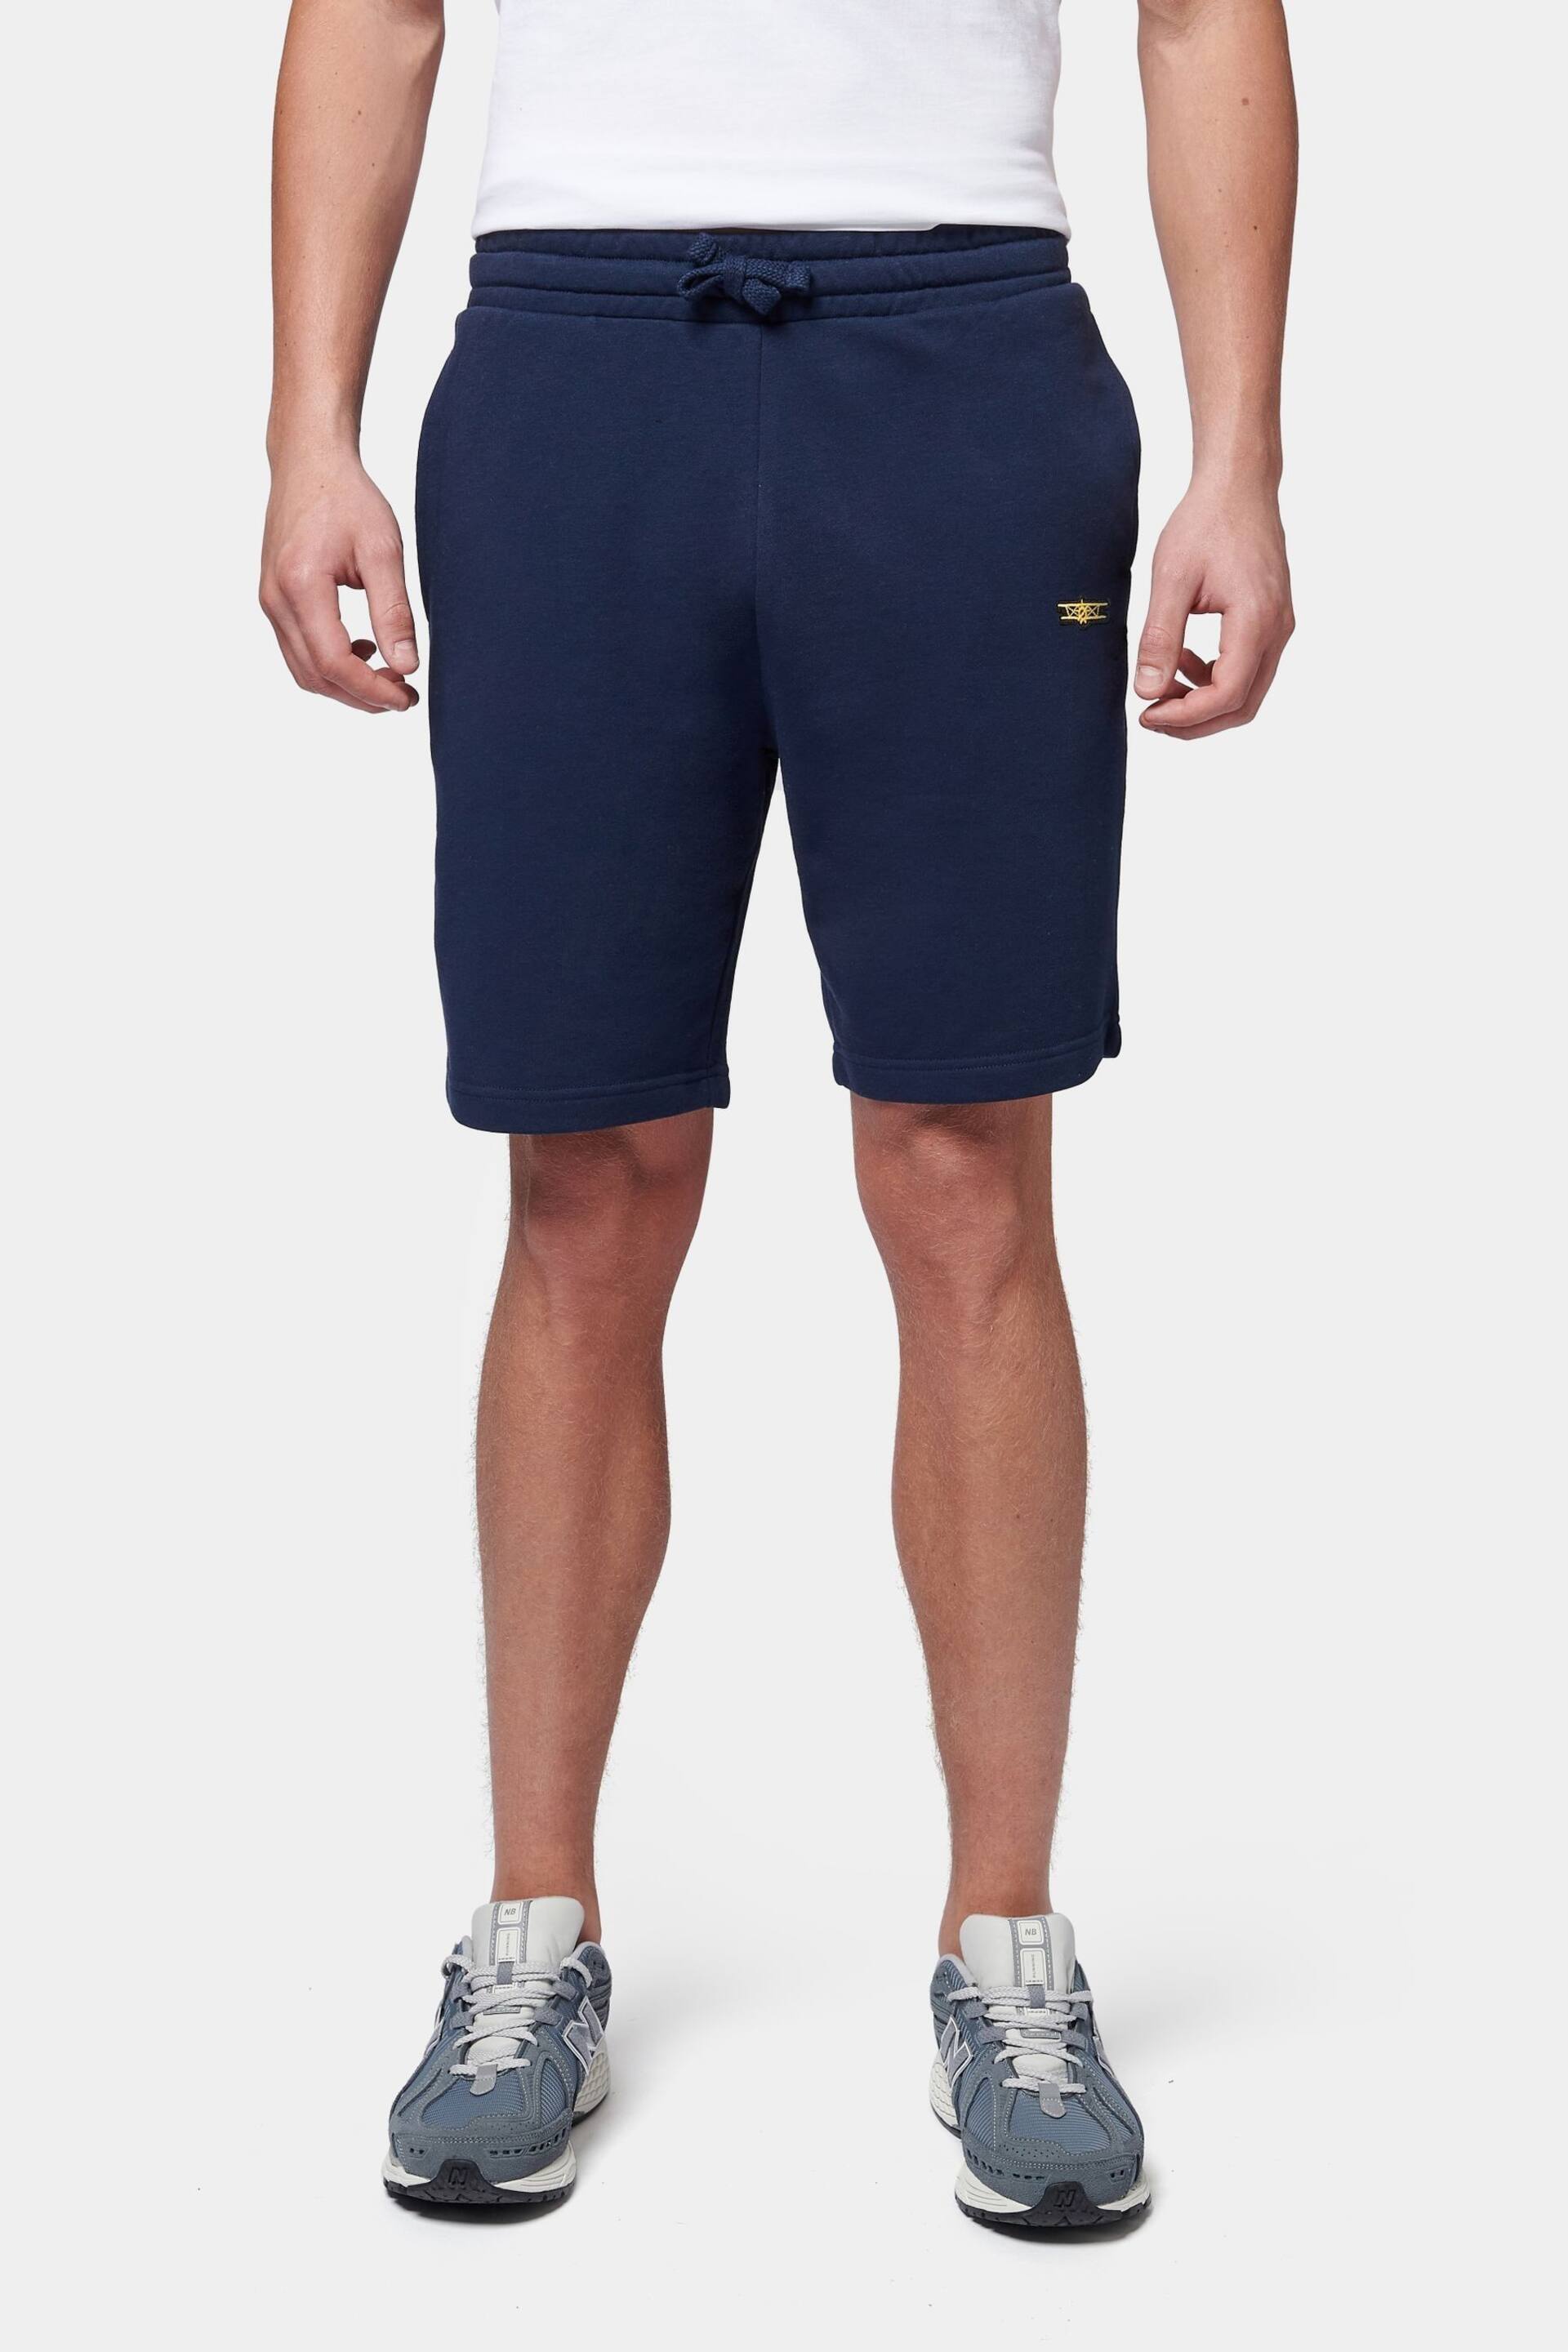 Flyers Mens Classic Fit Shorts - Image 1 of 8